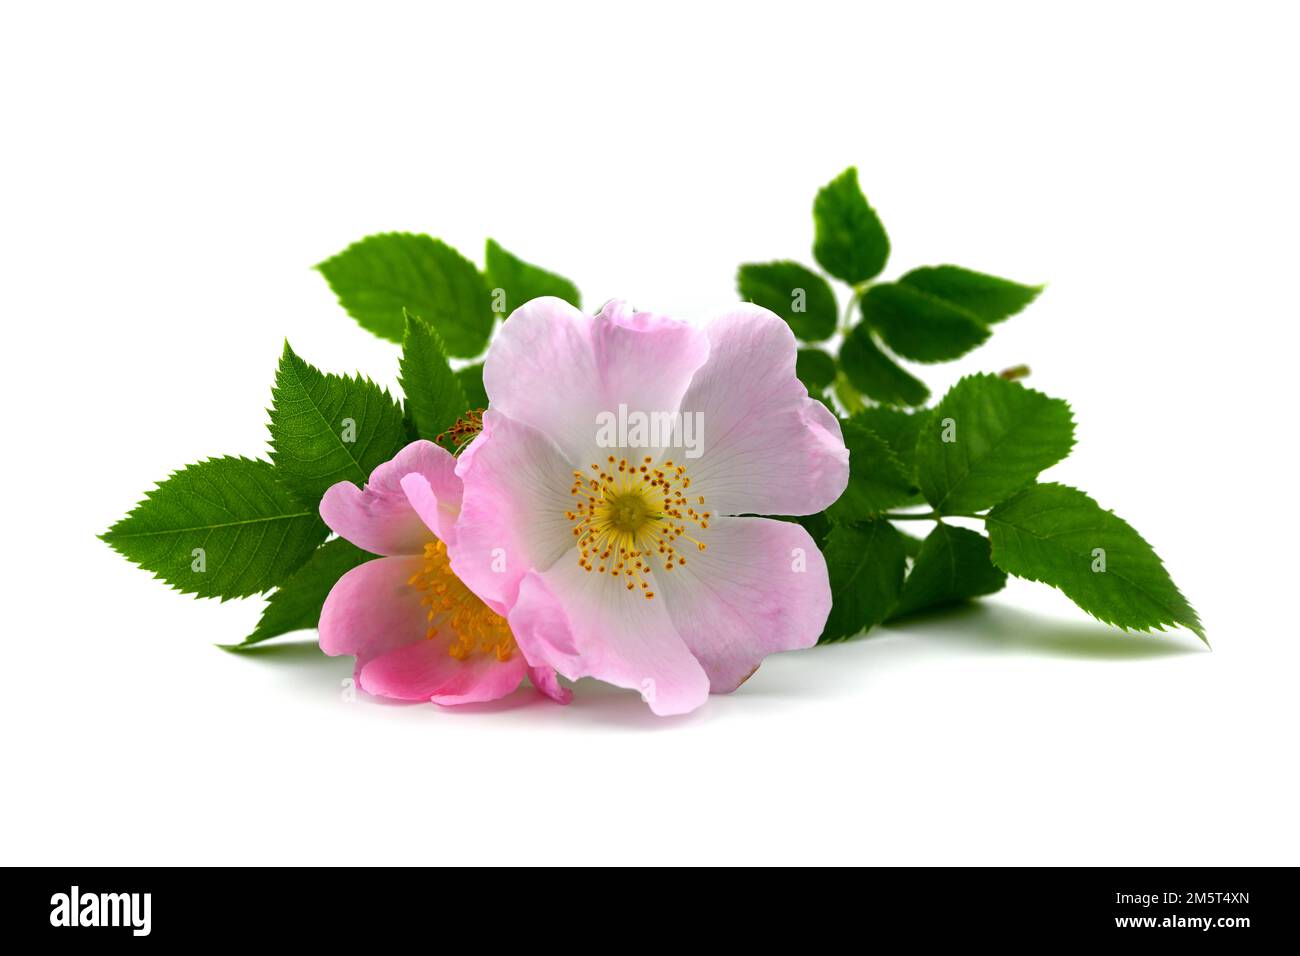 Branch of a dog rose with pink blossom Stock Photo